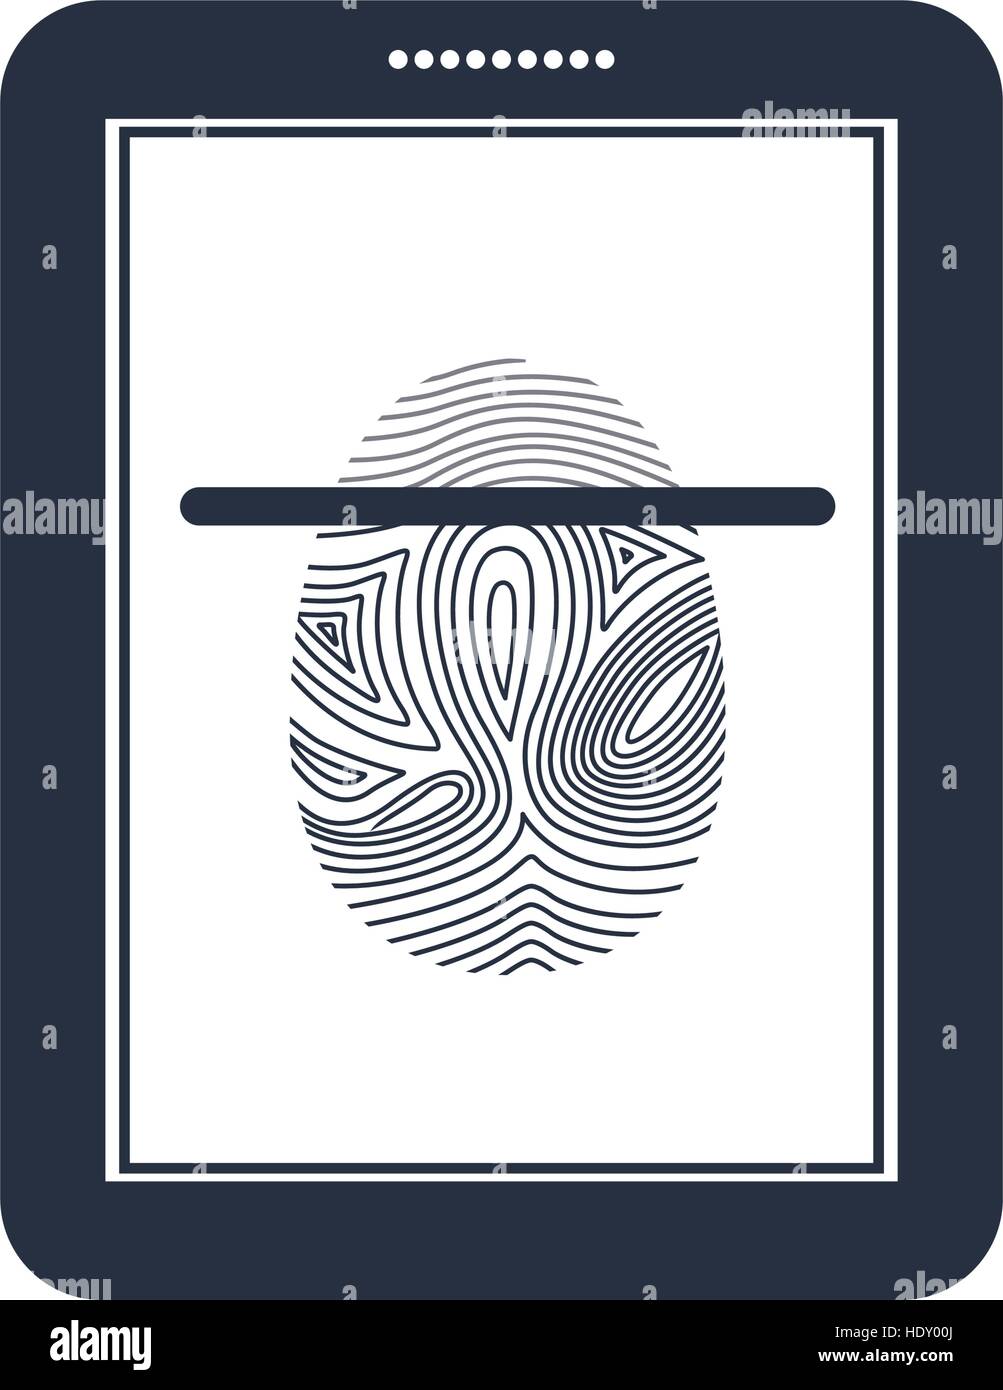 Fingerprint and tablet icon. Identity security print and privacy theme. Isolated design. Vector illustration Stock Vector